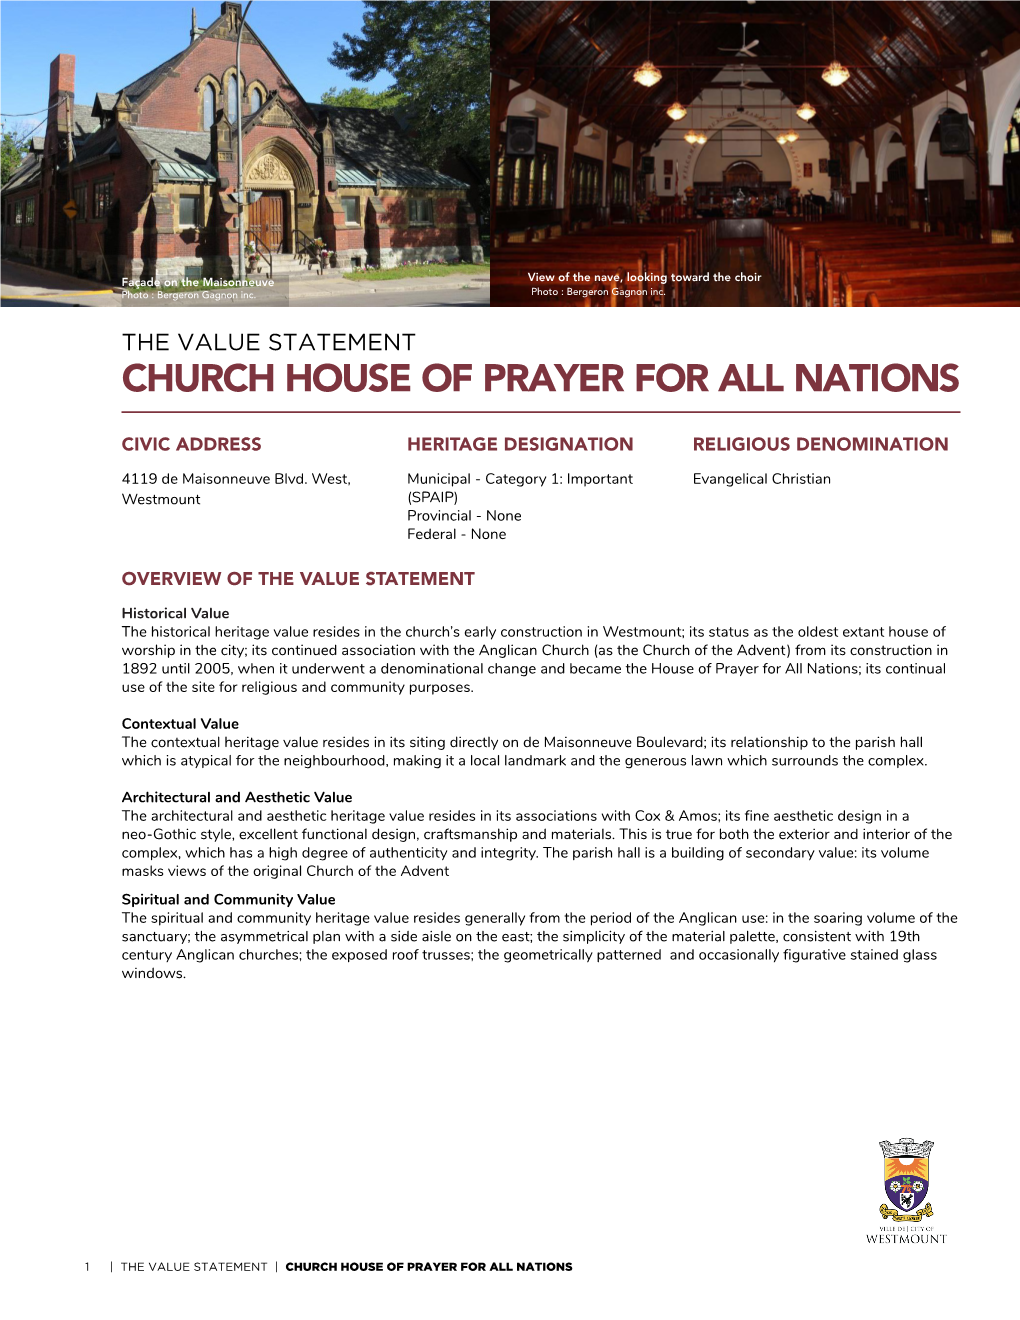 Church House of Prayer for All Nations